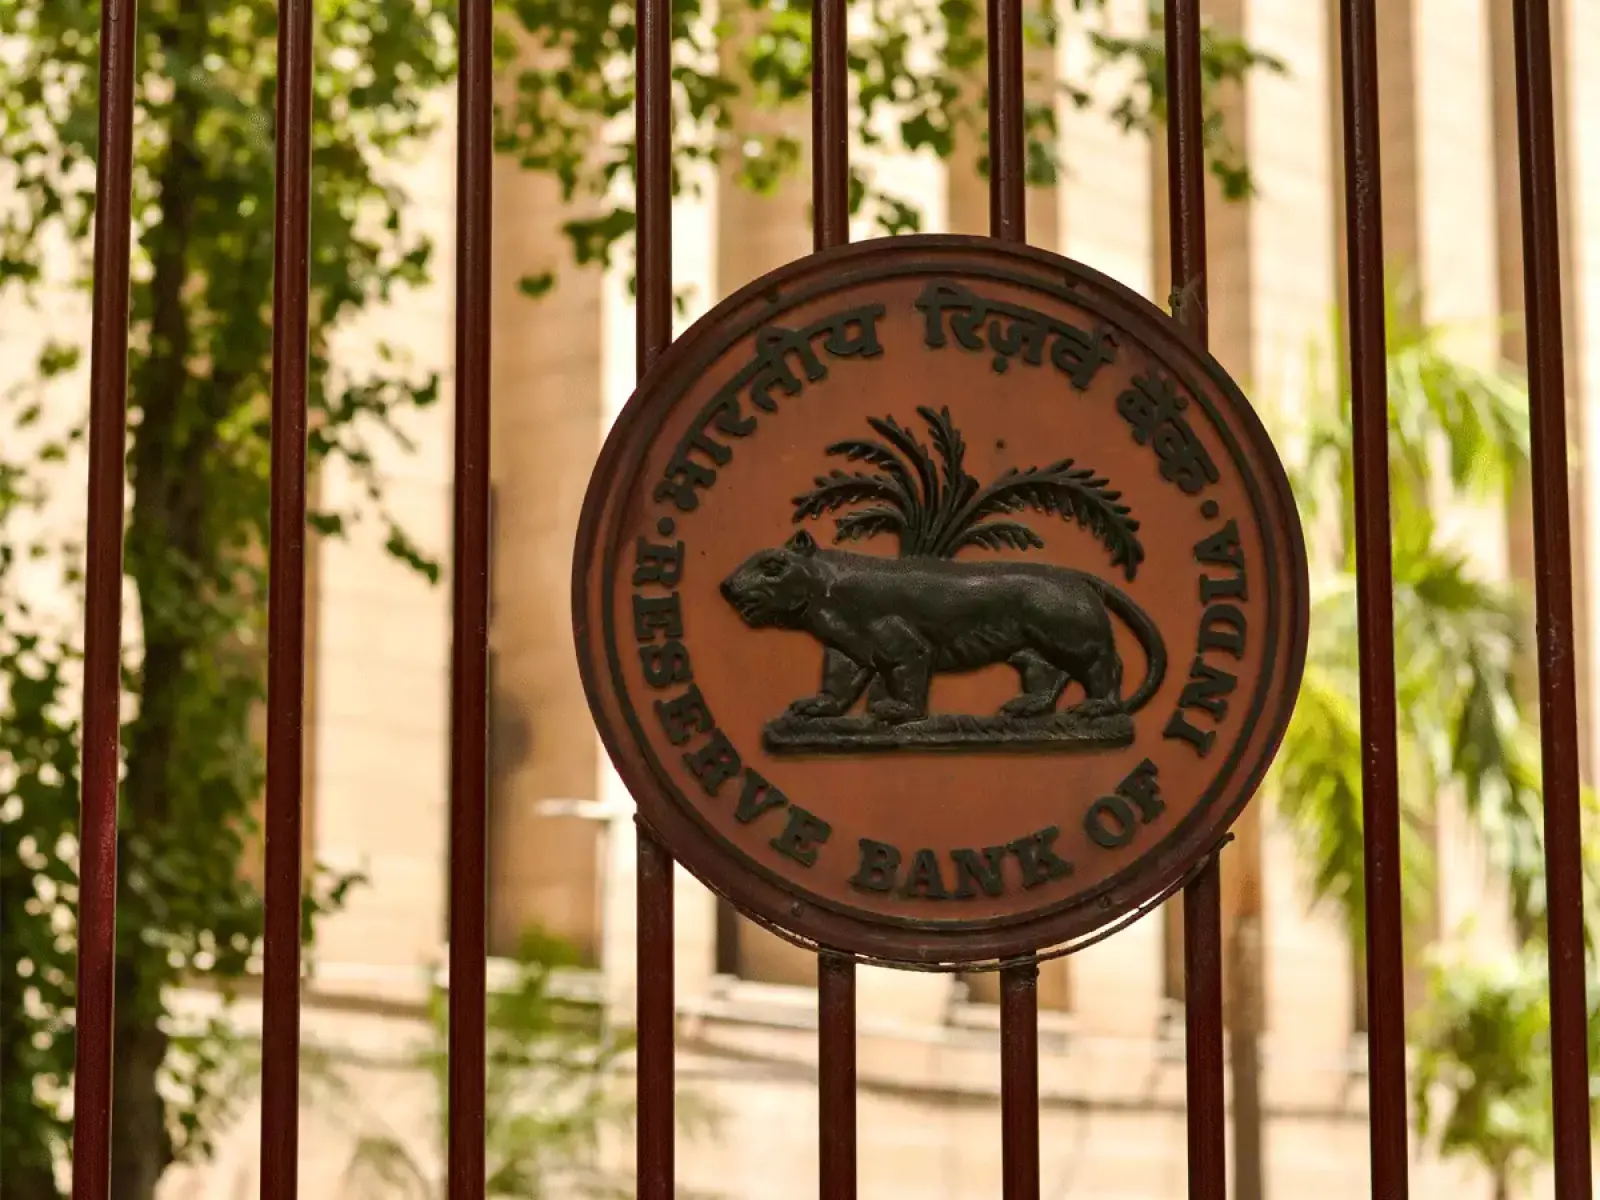 RBI gave instructions to banks and financial institutions, said to give details of all important facts related to loan